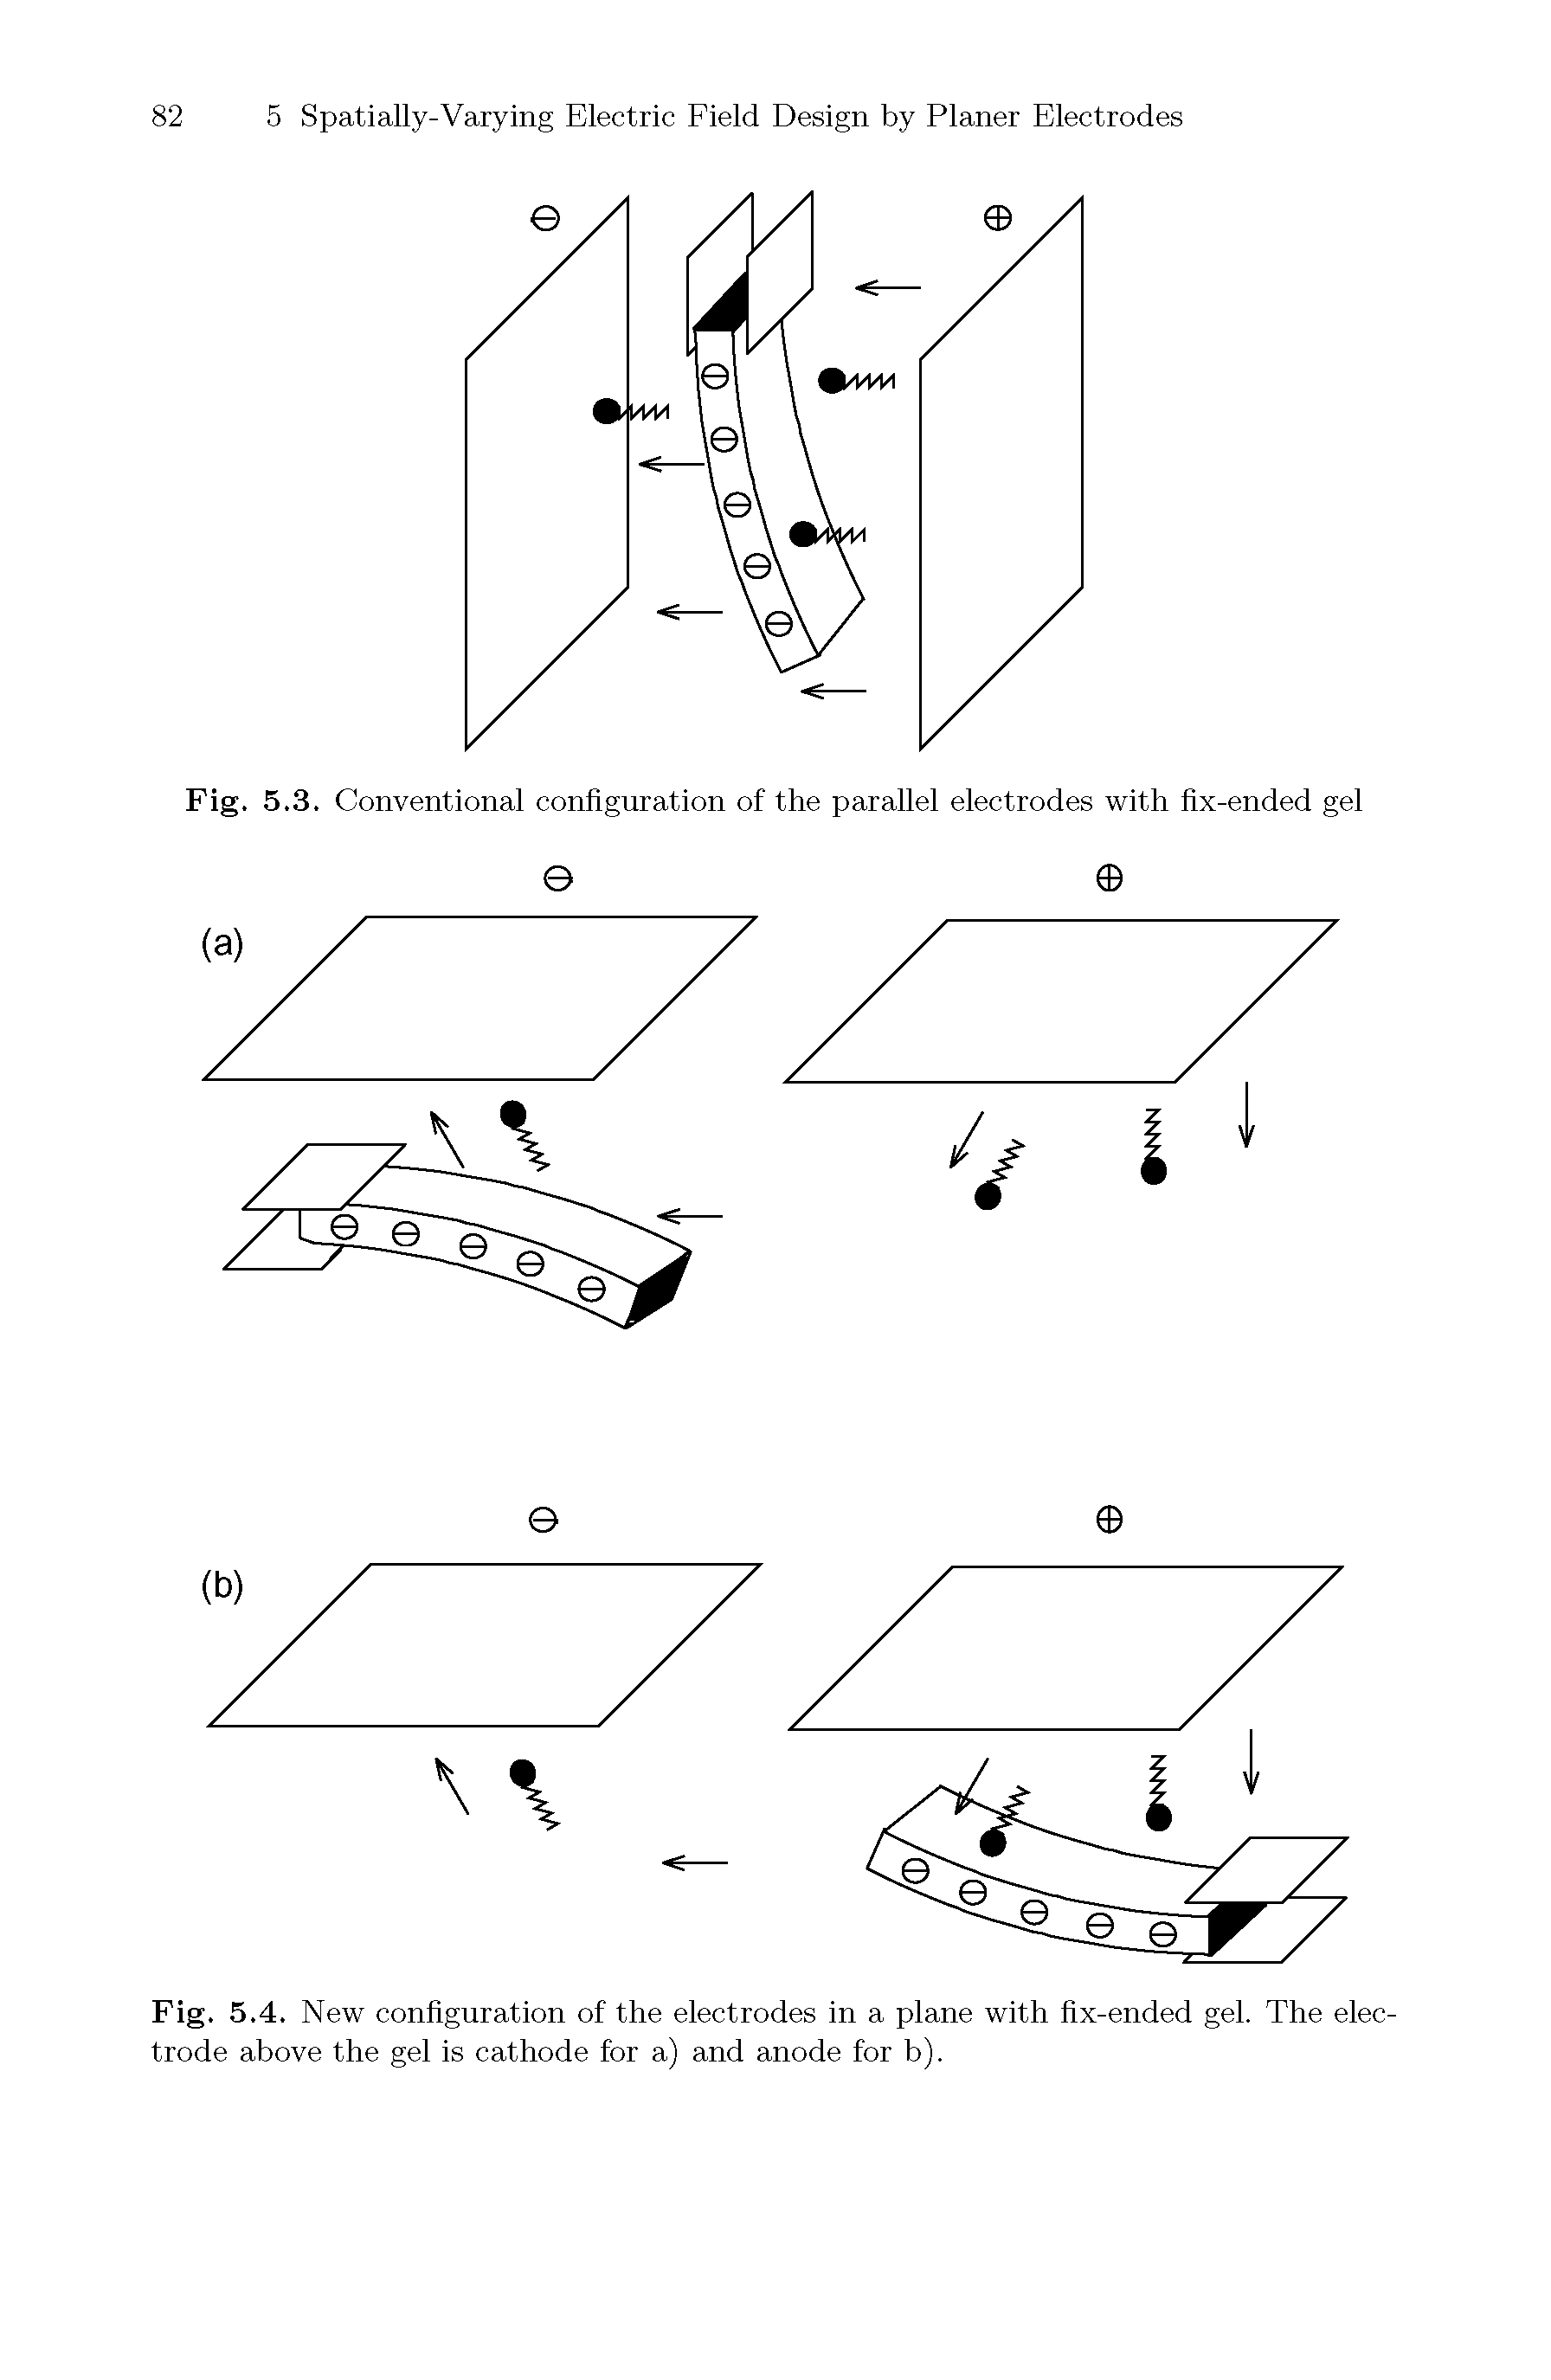 Fig. 5.4. New configuration of the electrodes in a plane with fix-ended gel. The electrode above the gel is cathode for a) and anode for b).